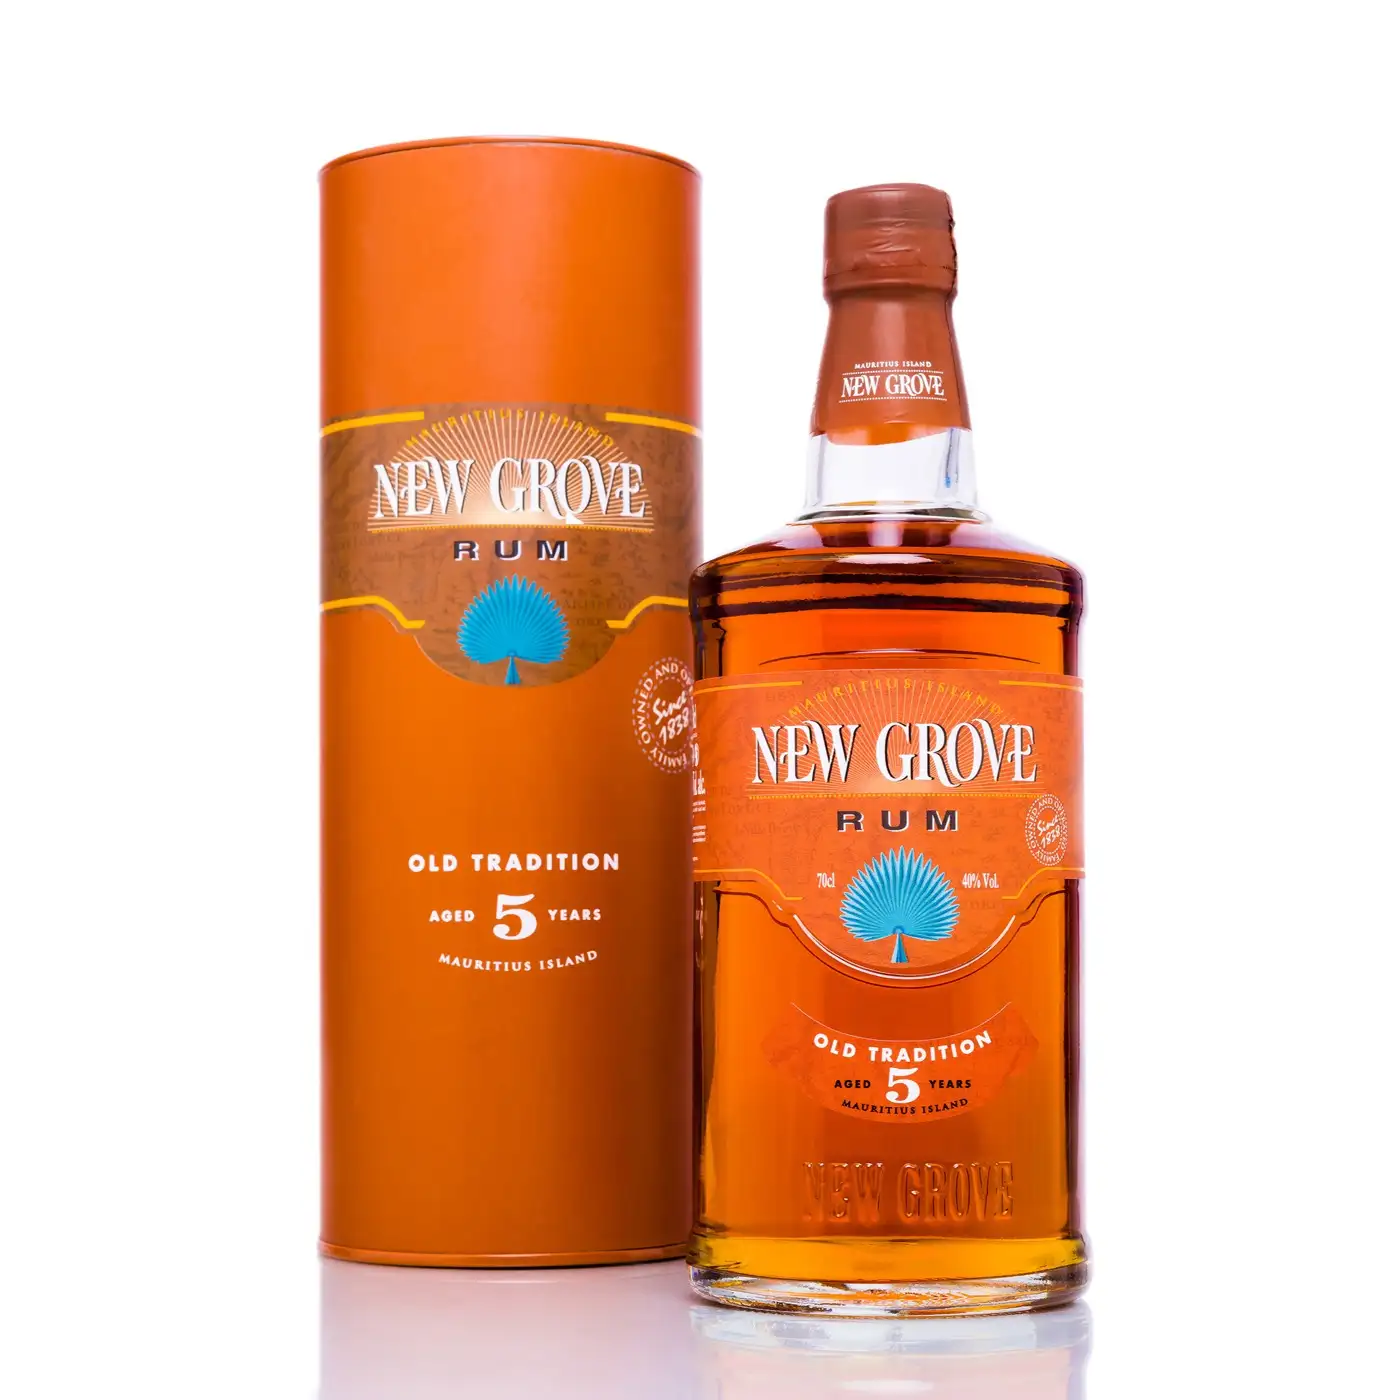 Image of the front of the bottle of the rum New Grove Old Tradition 5